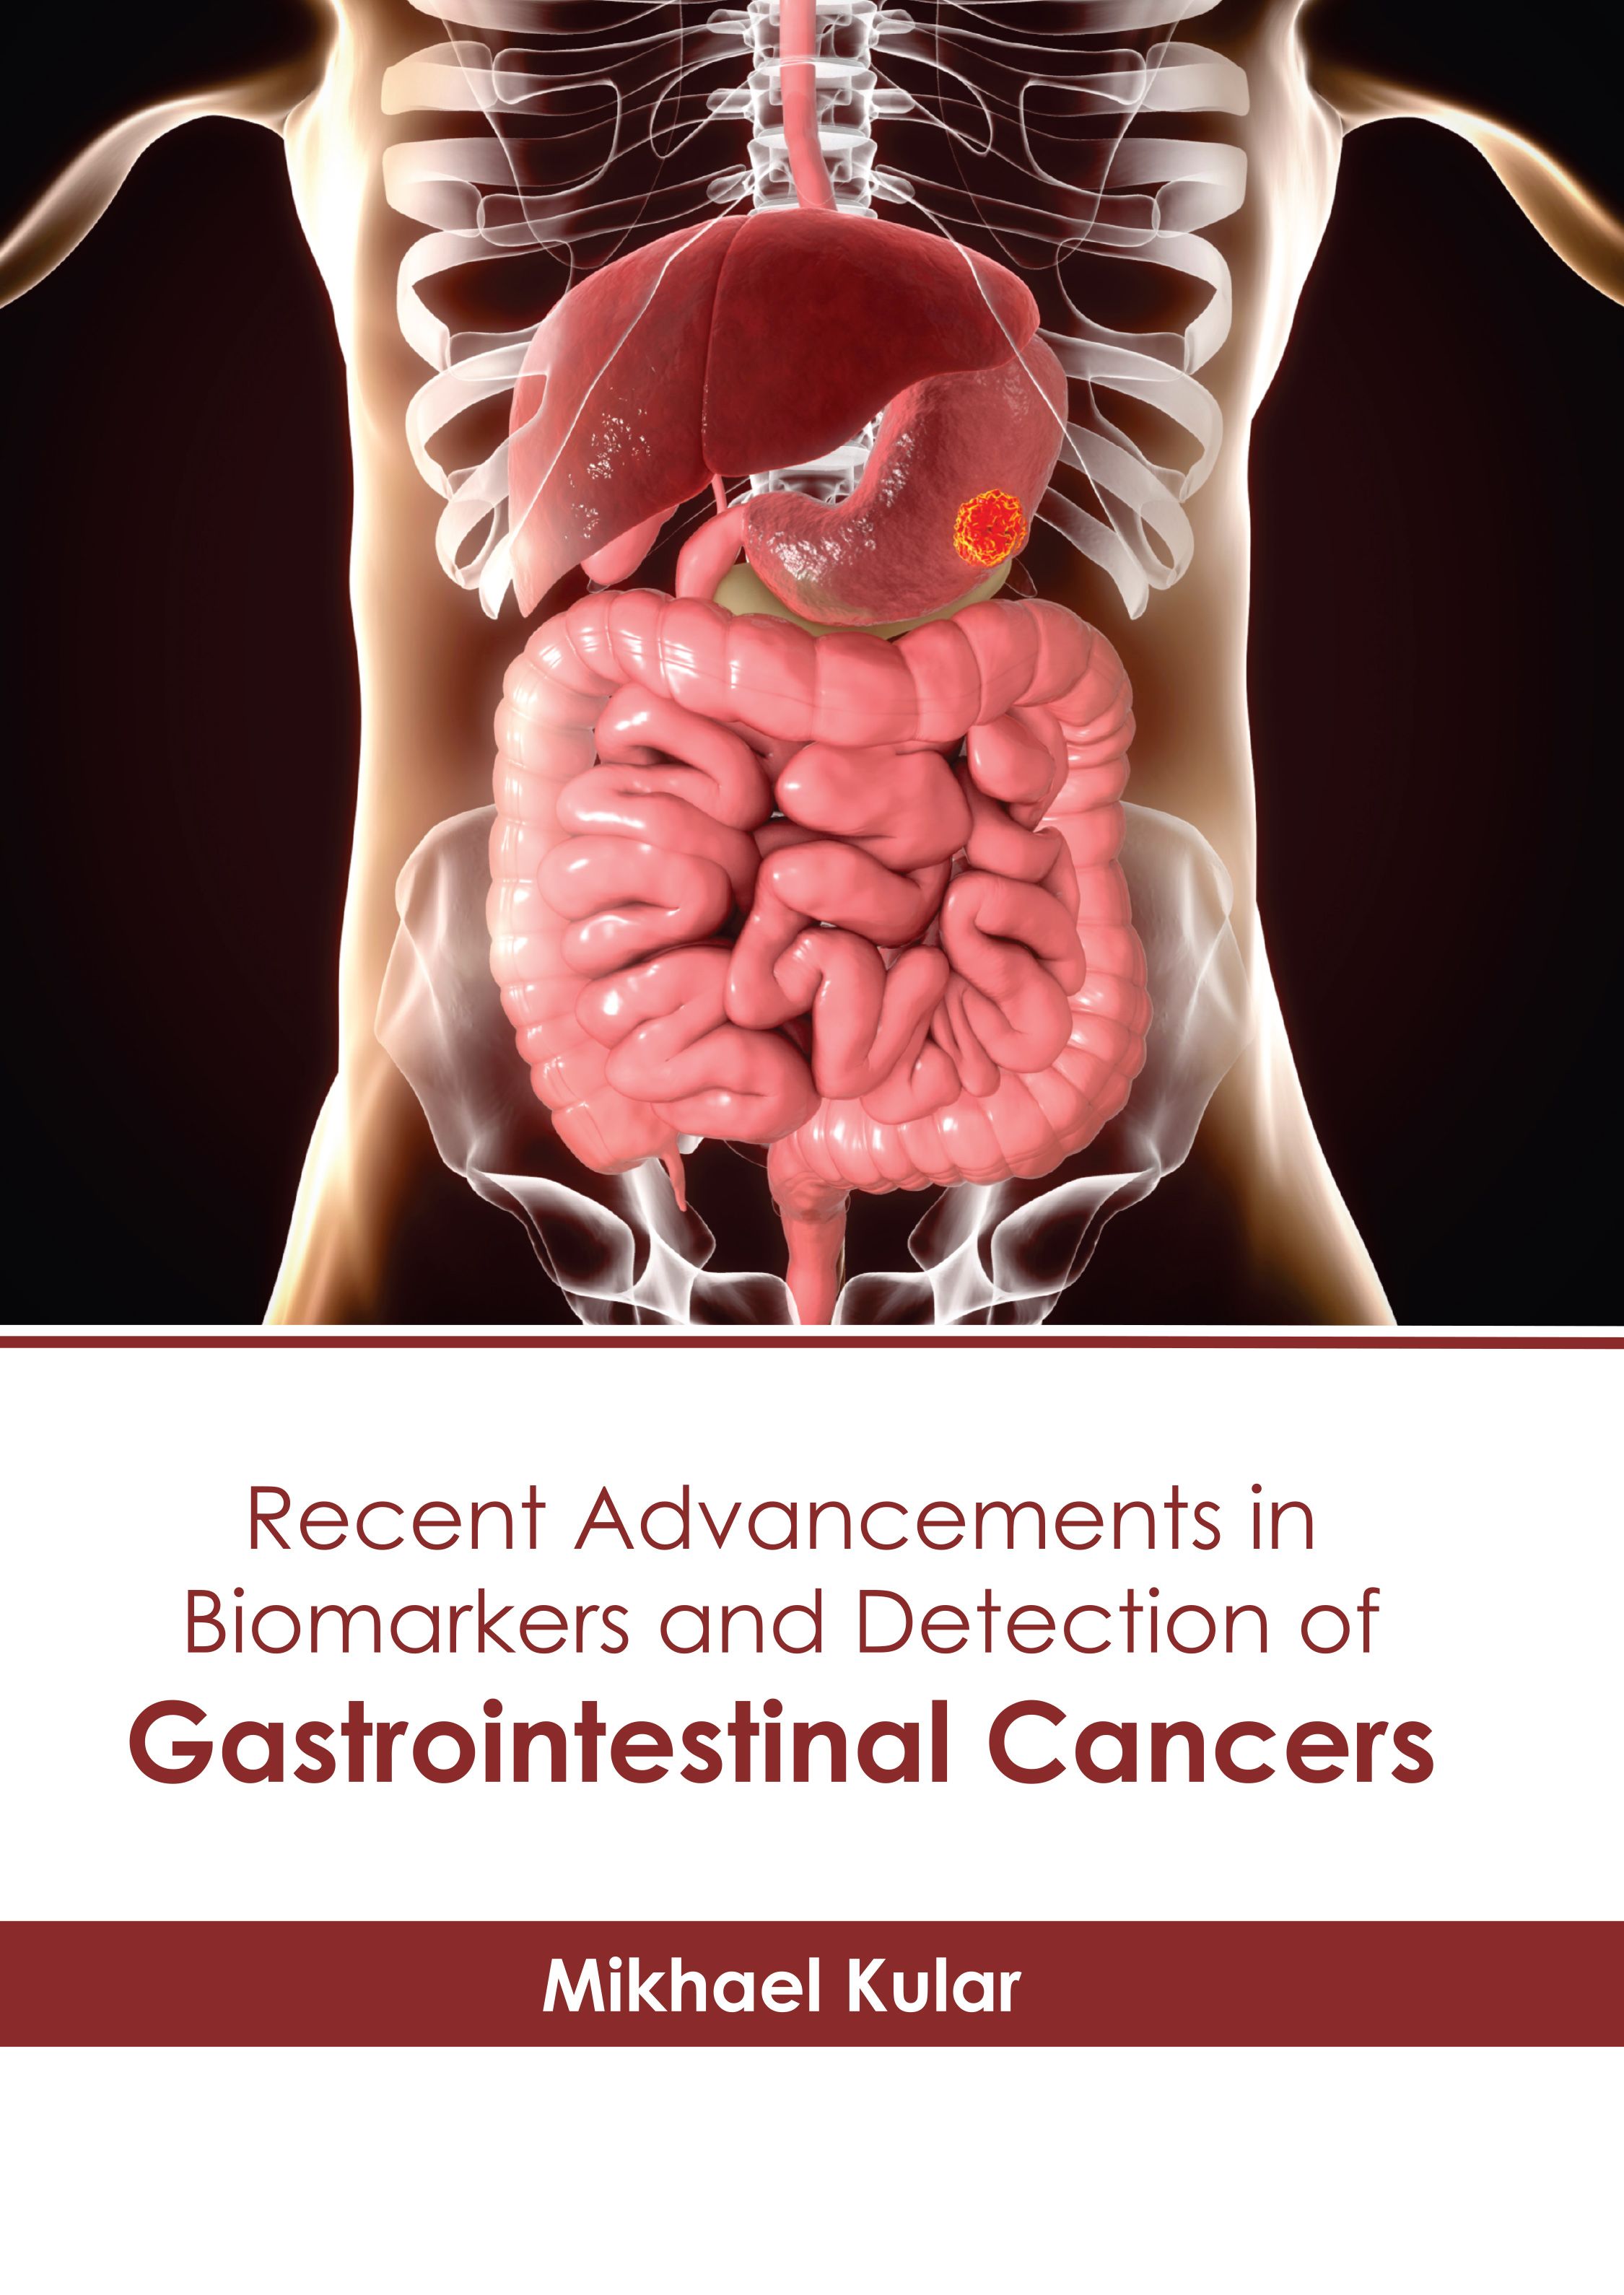 

medical-reference-books/gastroenterology/recent-advancements-in-biomarkers-and-detection-of-gastrointestinal-cancers-9798887404196